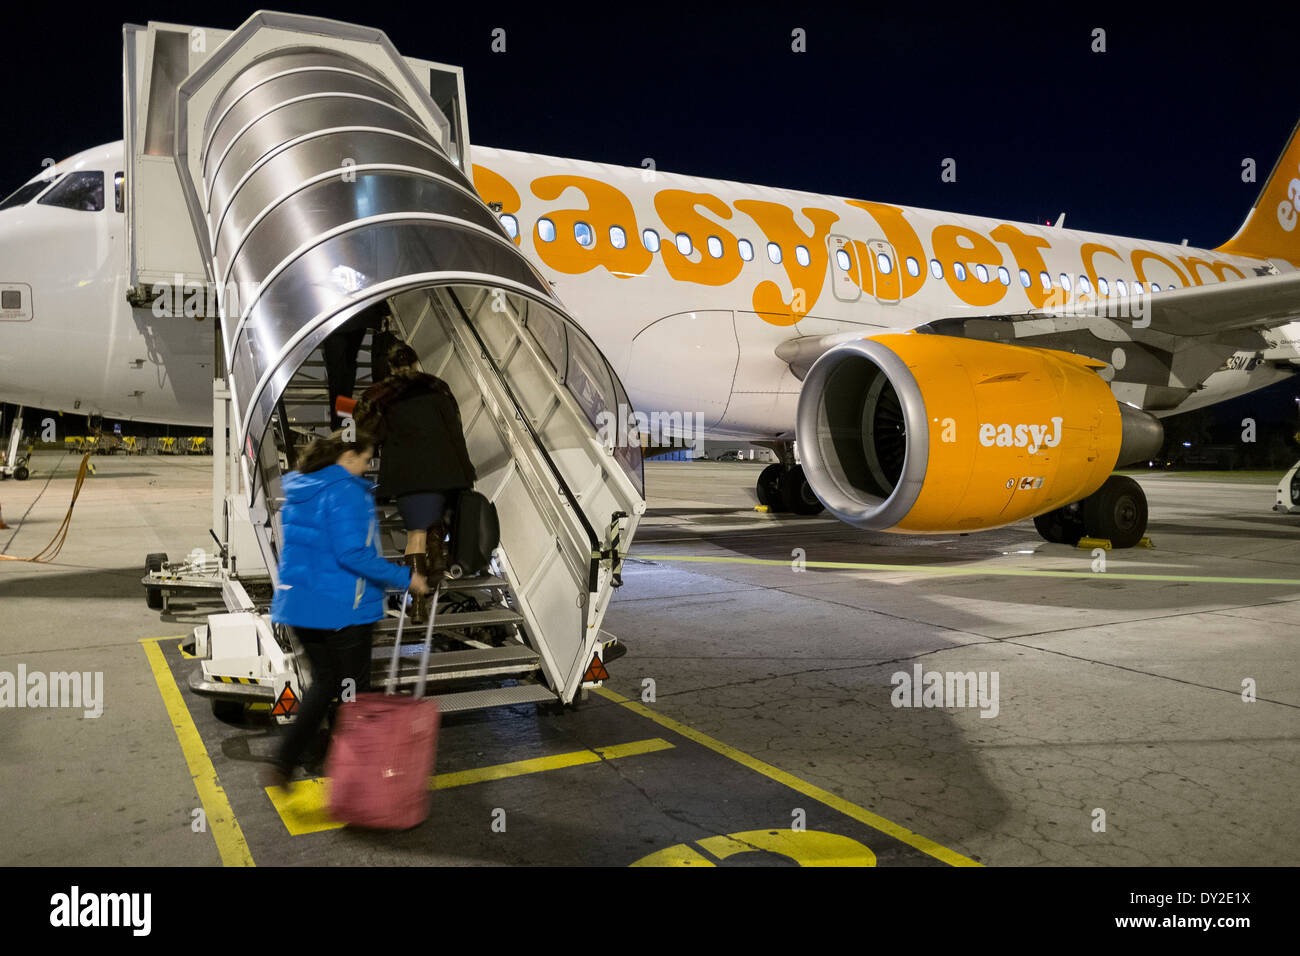 Easy Jet low-cost airlines Stock Photo